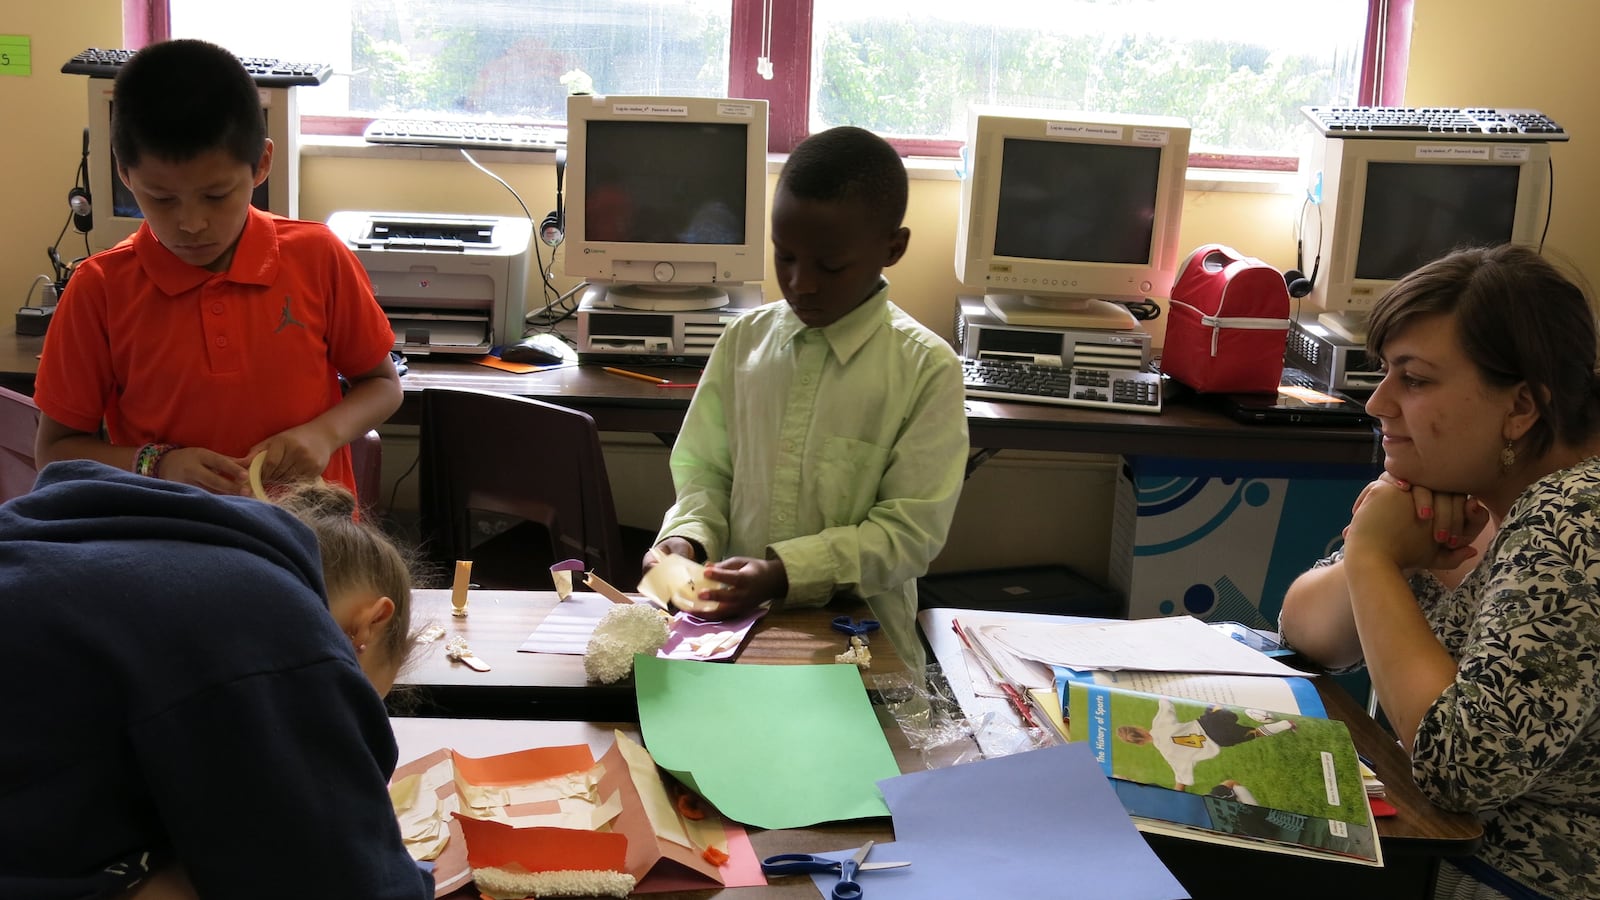 Students attend a summer program at De La Salle Elementary, a Catholic school in Memphis that has been open to accepting state-funded tuition vouchers.